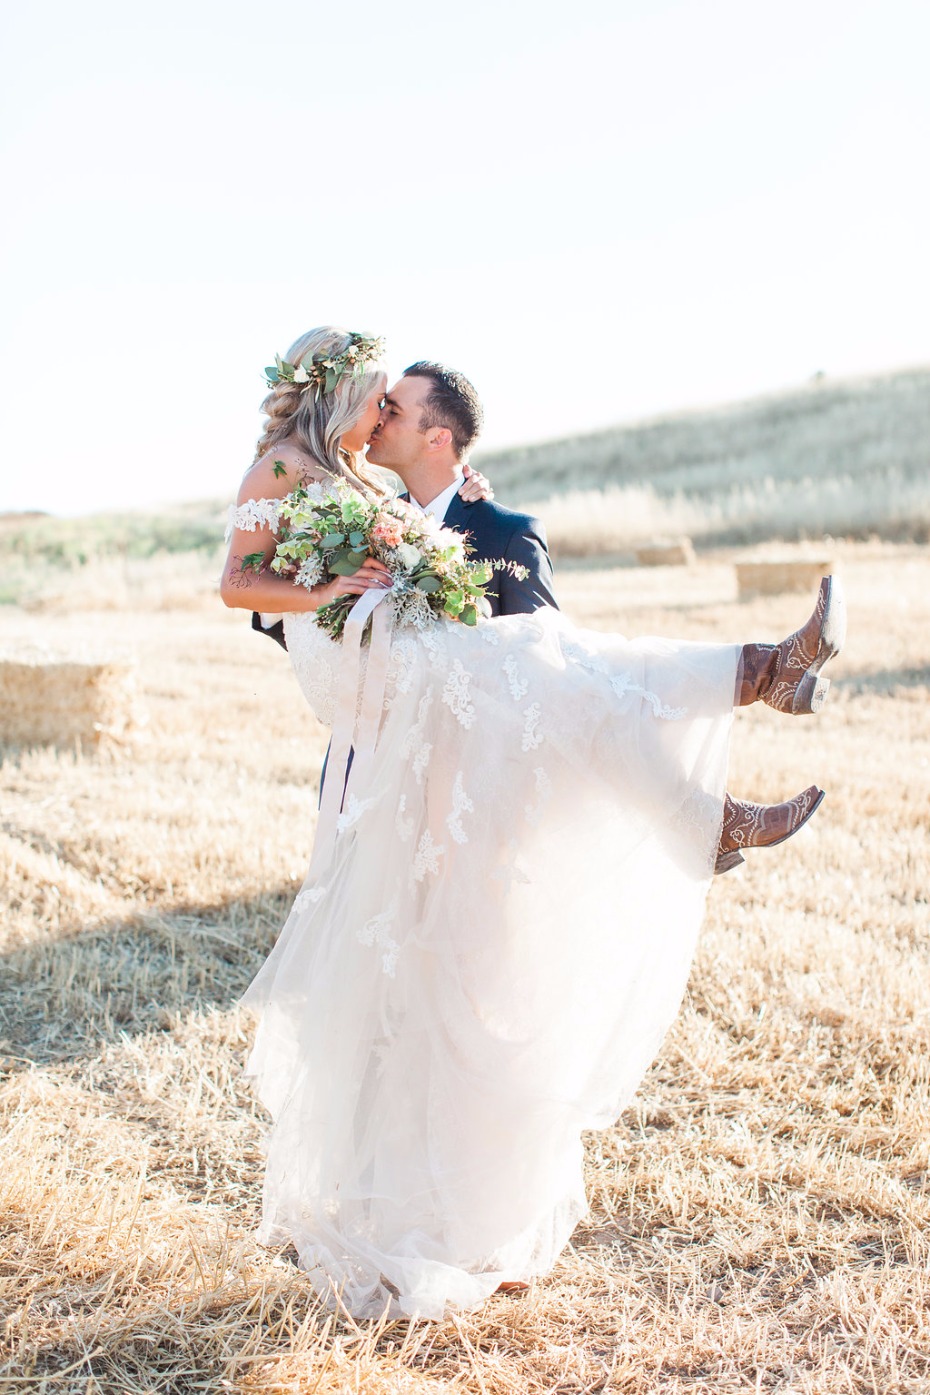 Gorgeous country chic wedding